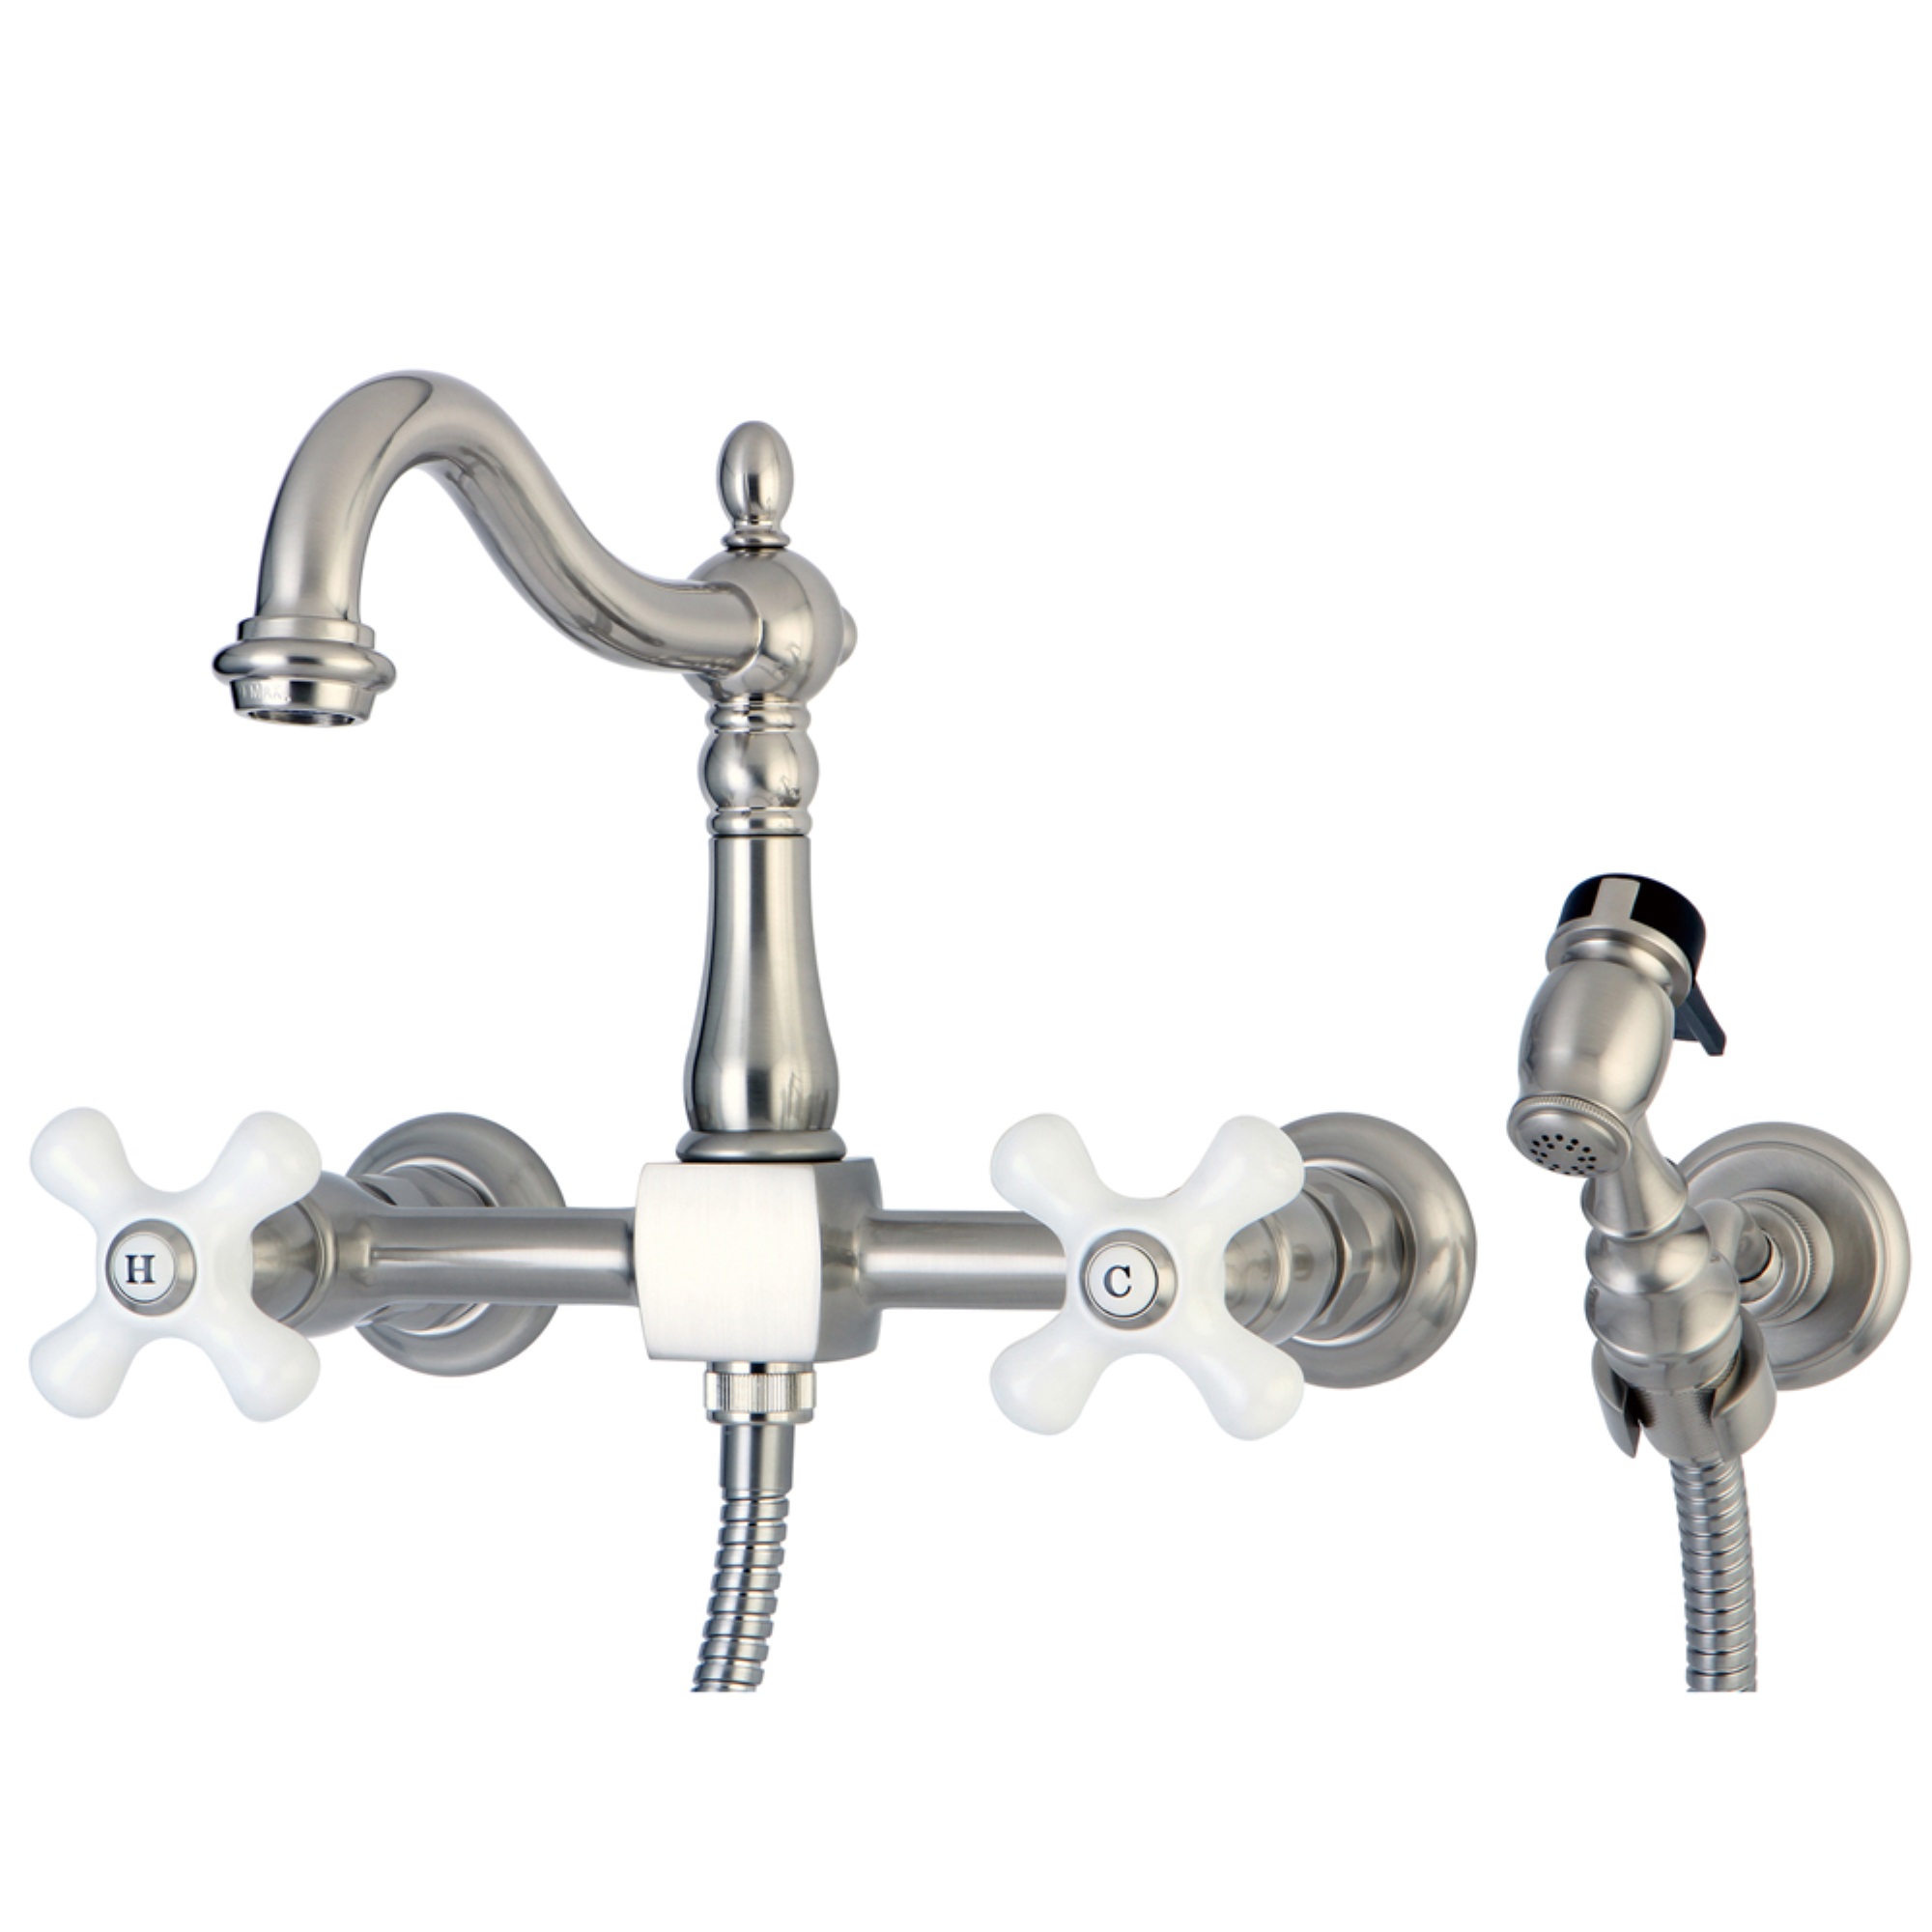 Kingston Brass Heritage 8-Inch Centerset Wall Mount Kitchen Faucet with Brass Sprayer, Brushed Nickel